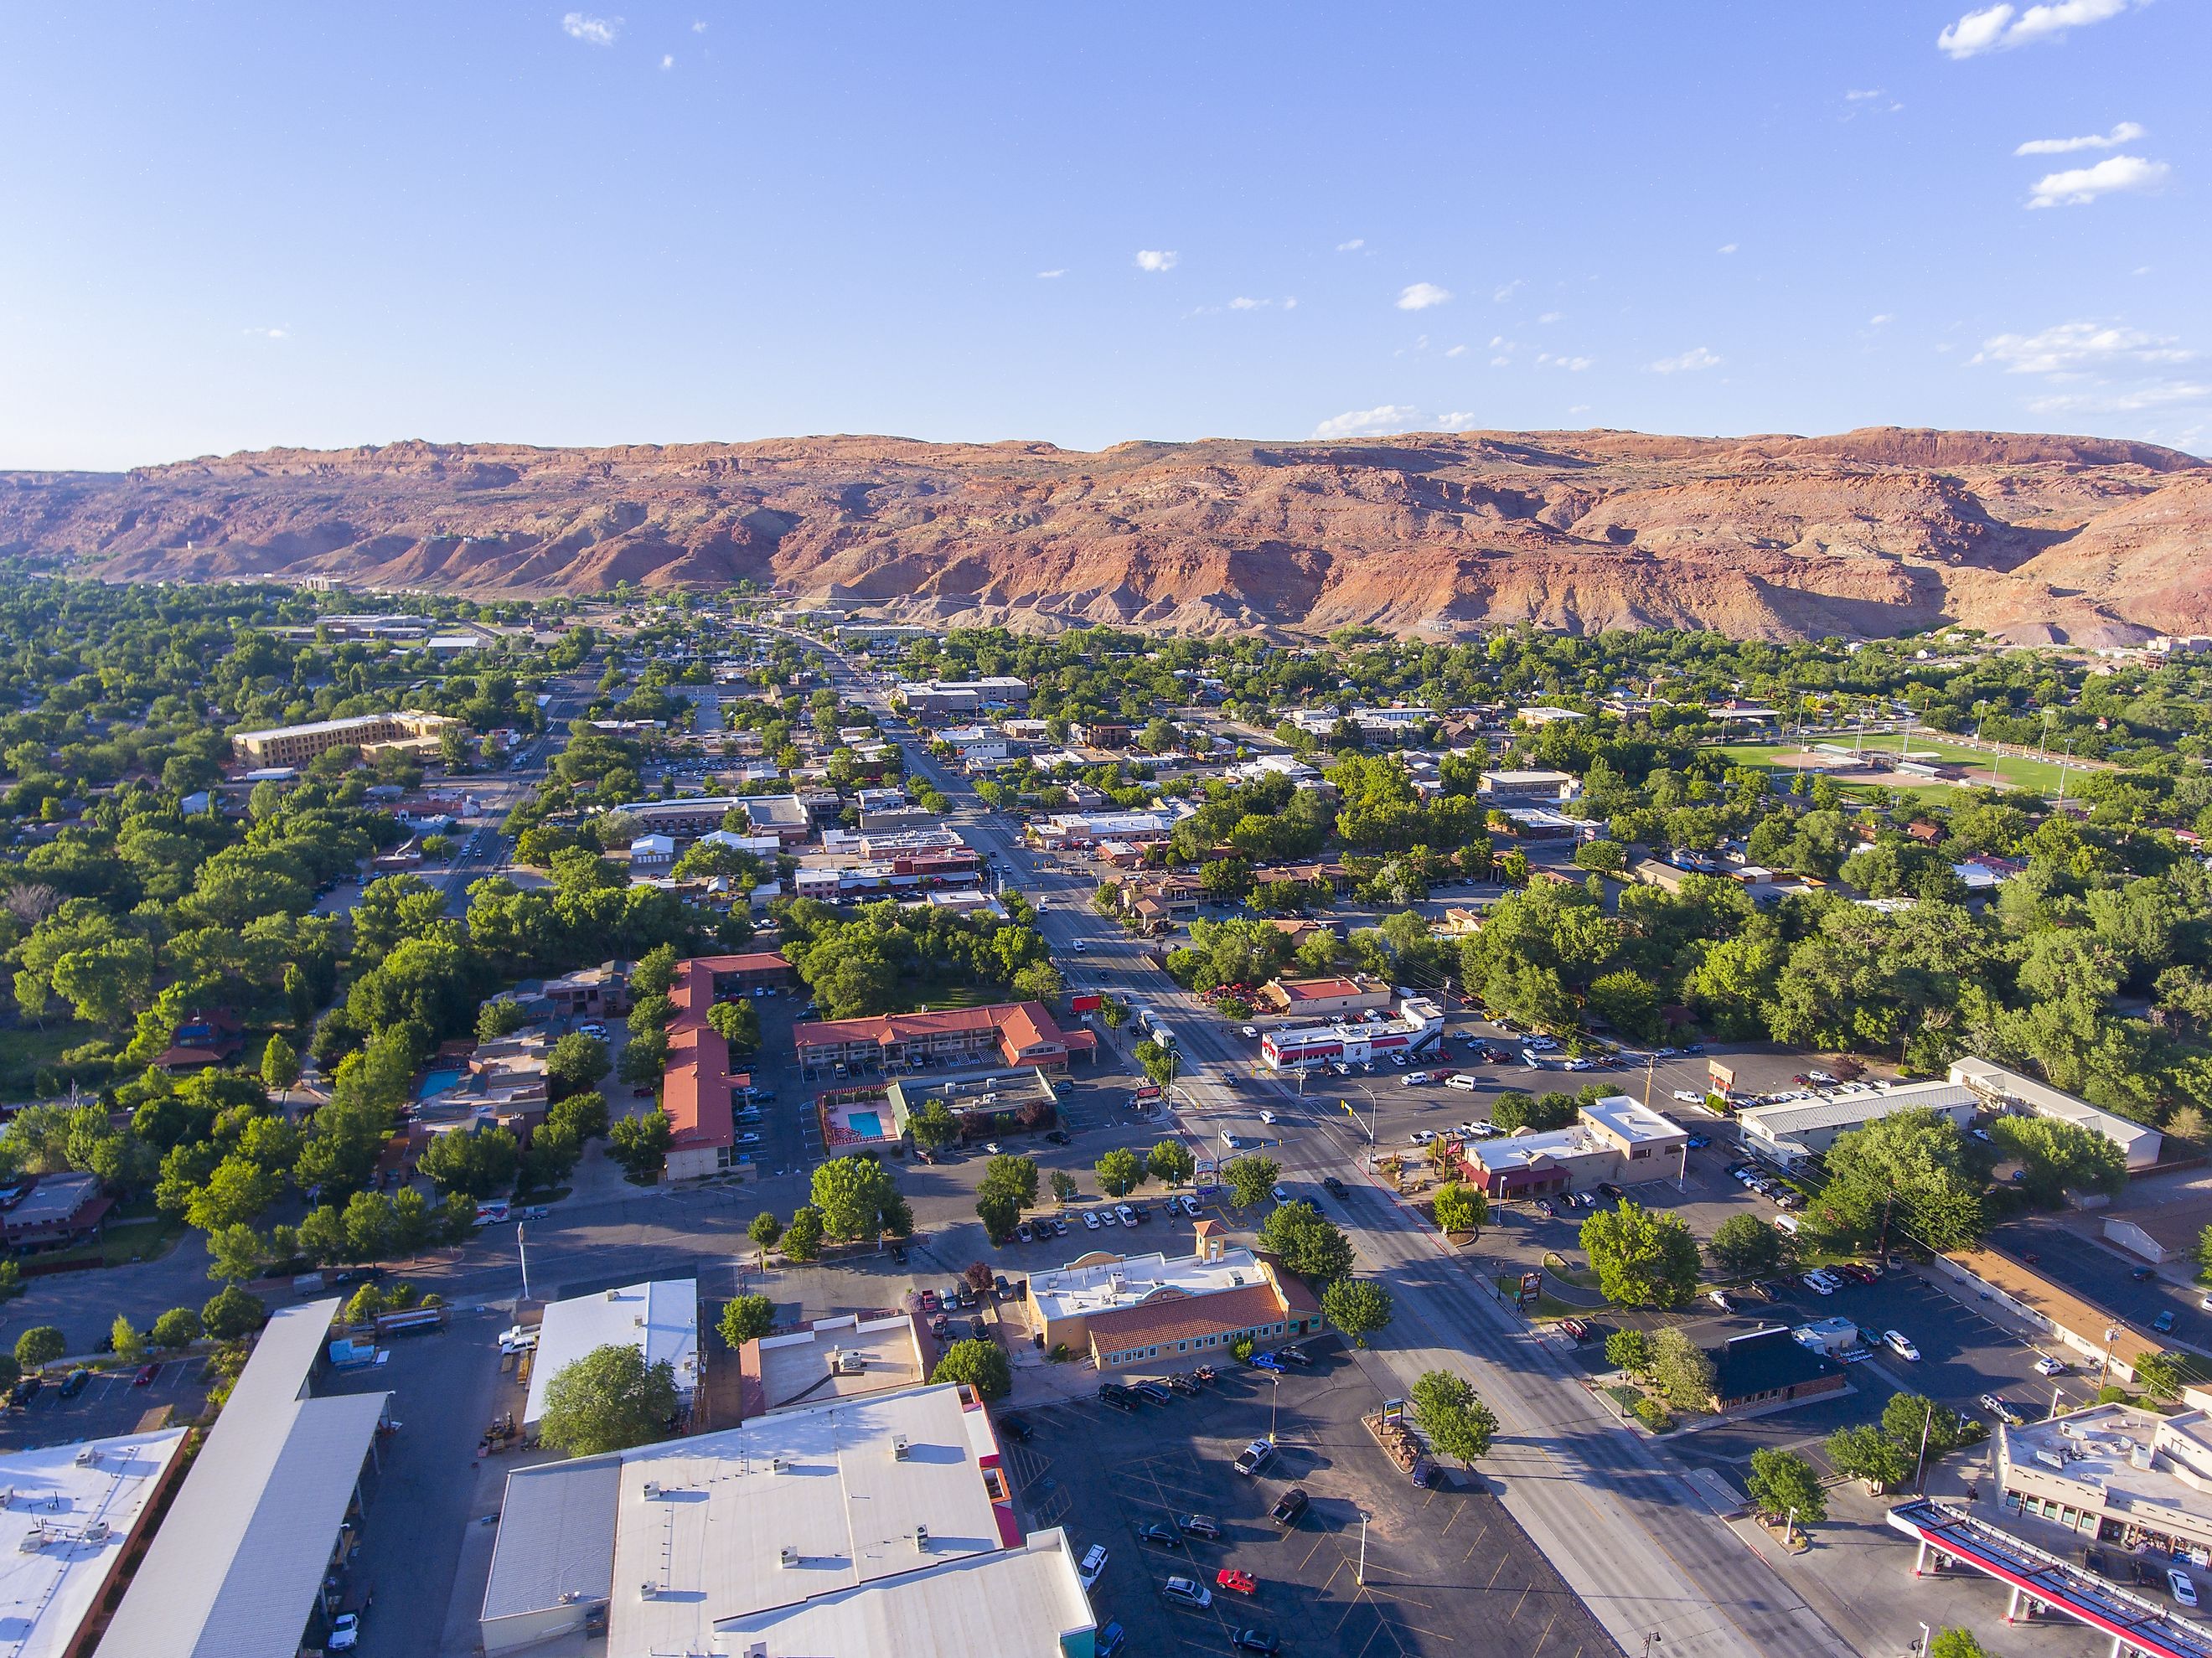 Aerial view of the Moab City center in Utah